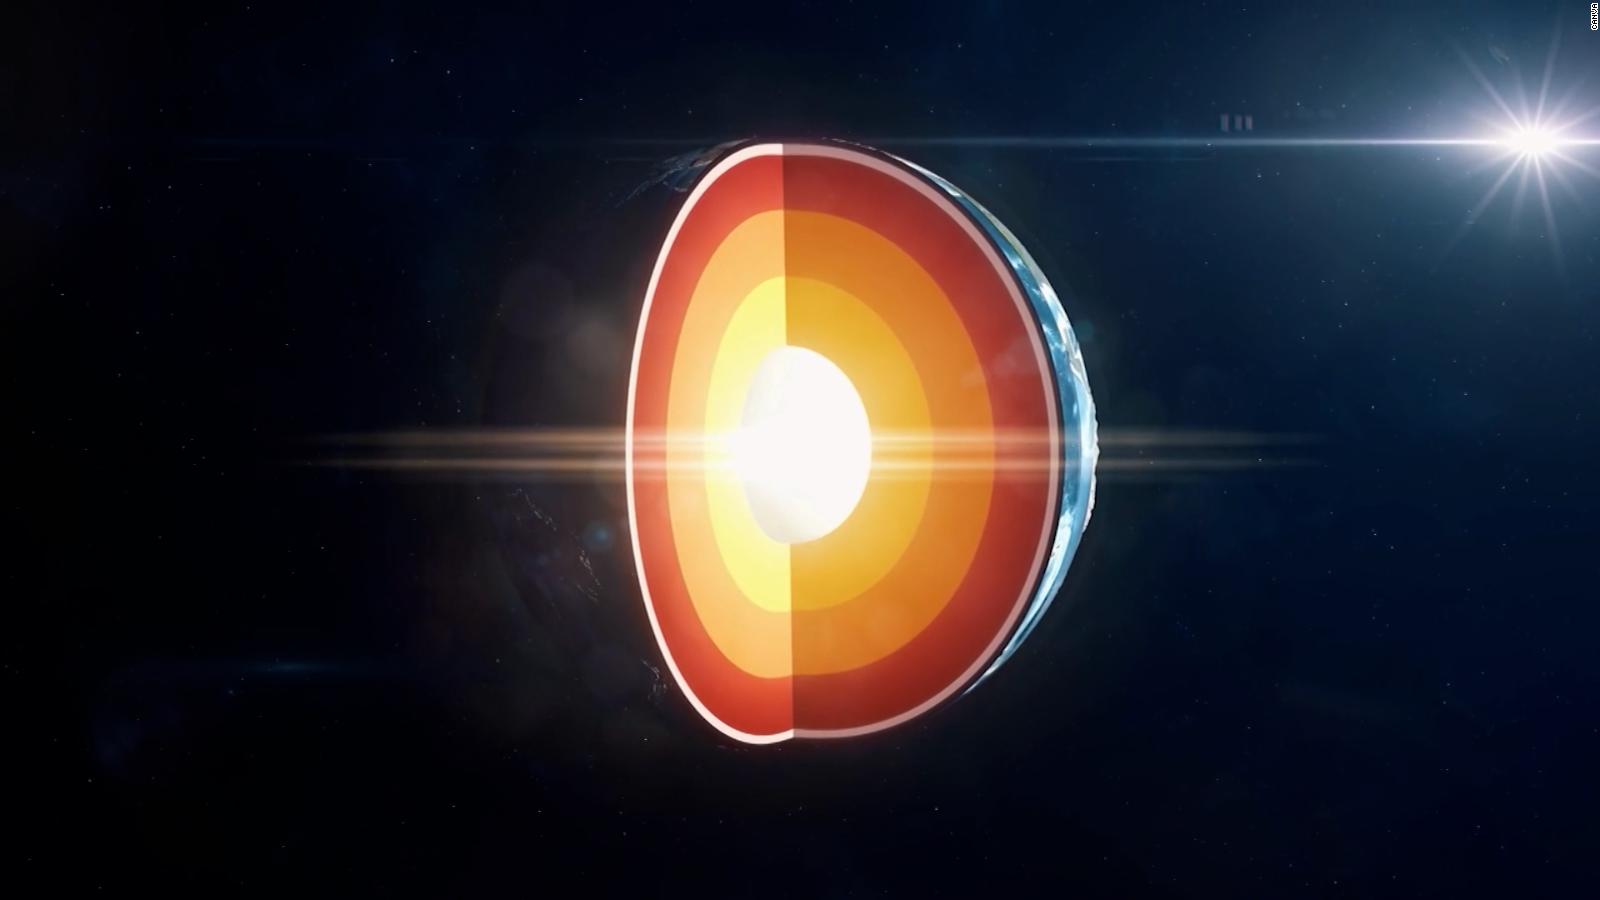 What does it mean that the Earth’s core may have slowed down?  How does it affect our lives?